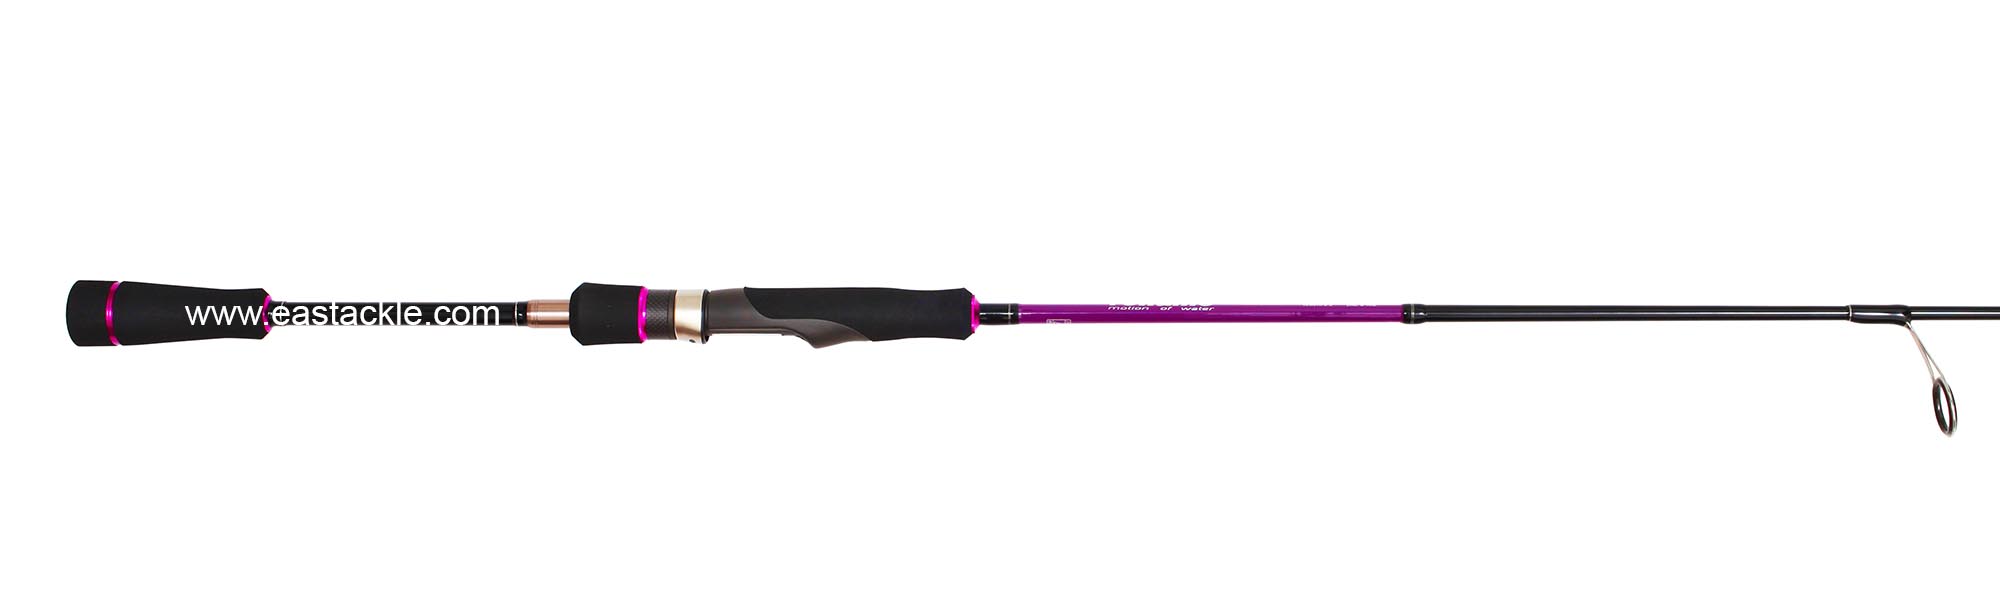 Rapala - Vallemo - VMS662MH - Spinning Rod - Butt to Stripper Guide (Side View) | Eastackle